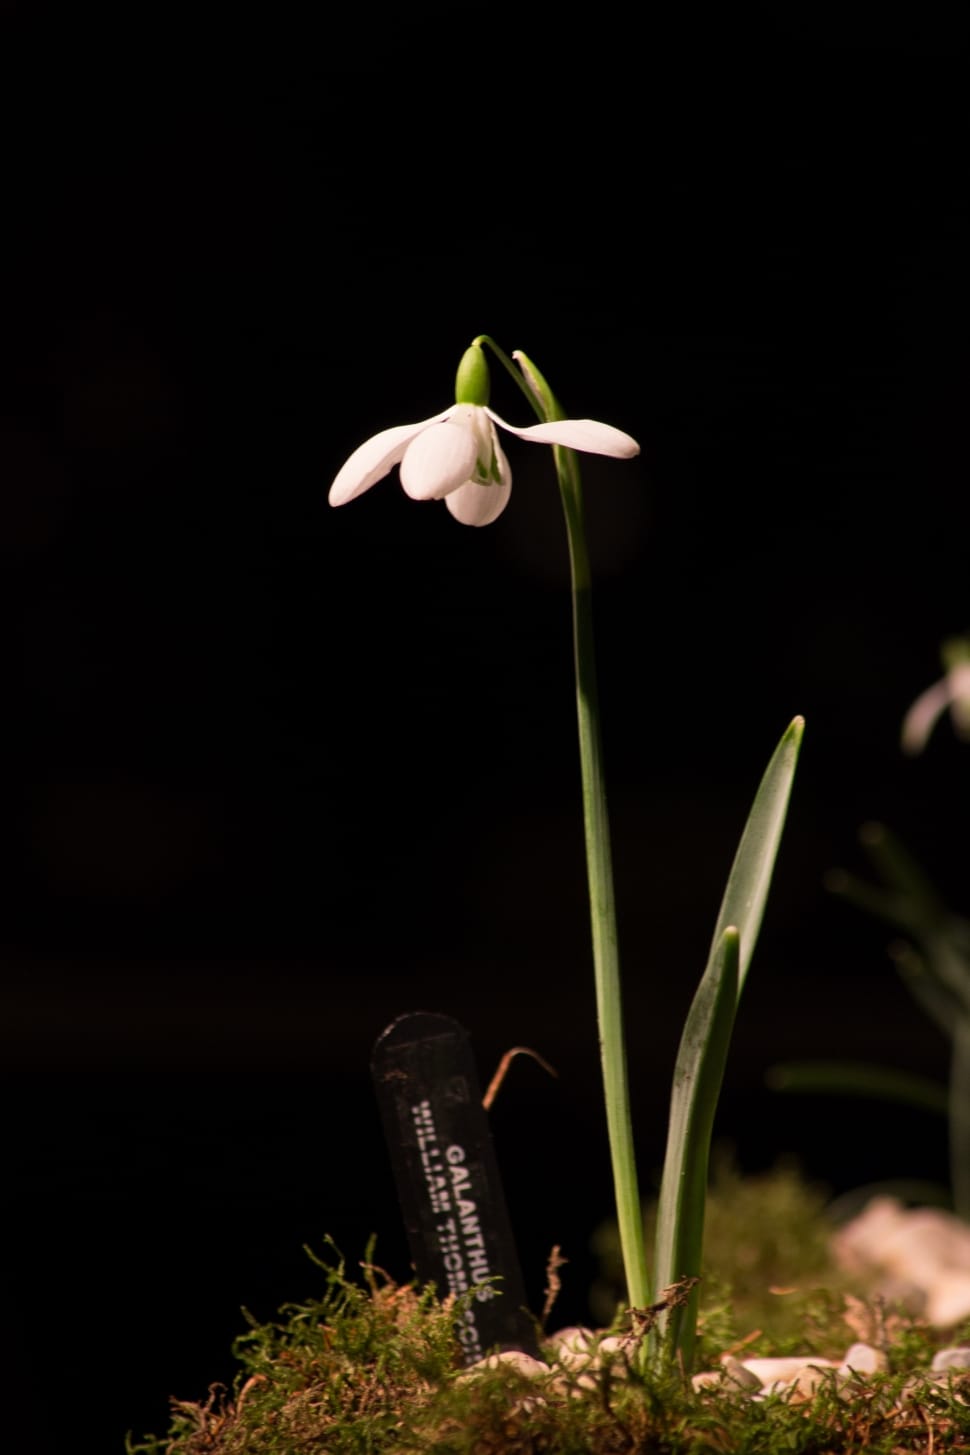 white snowdrop flower preview